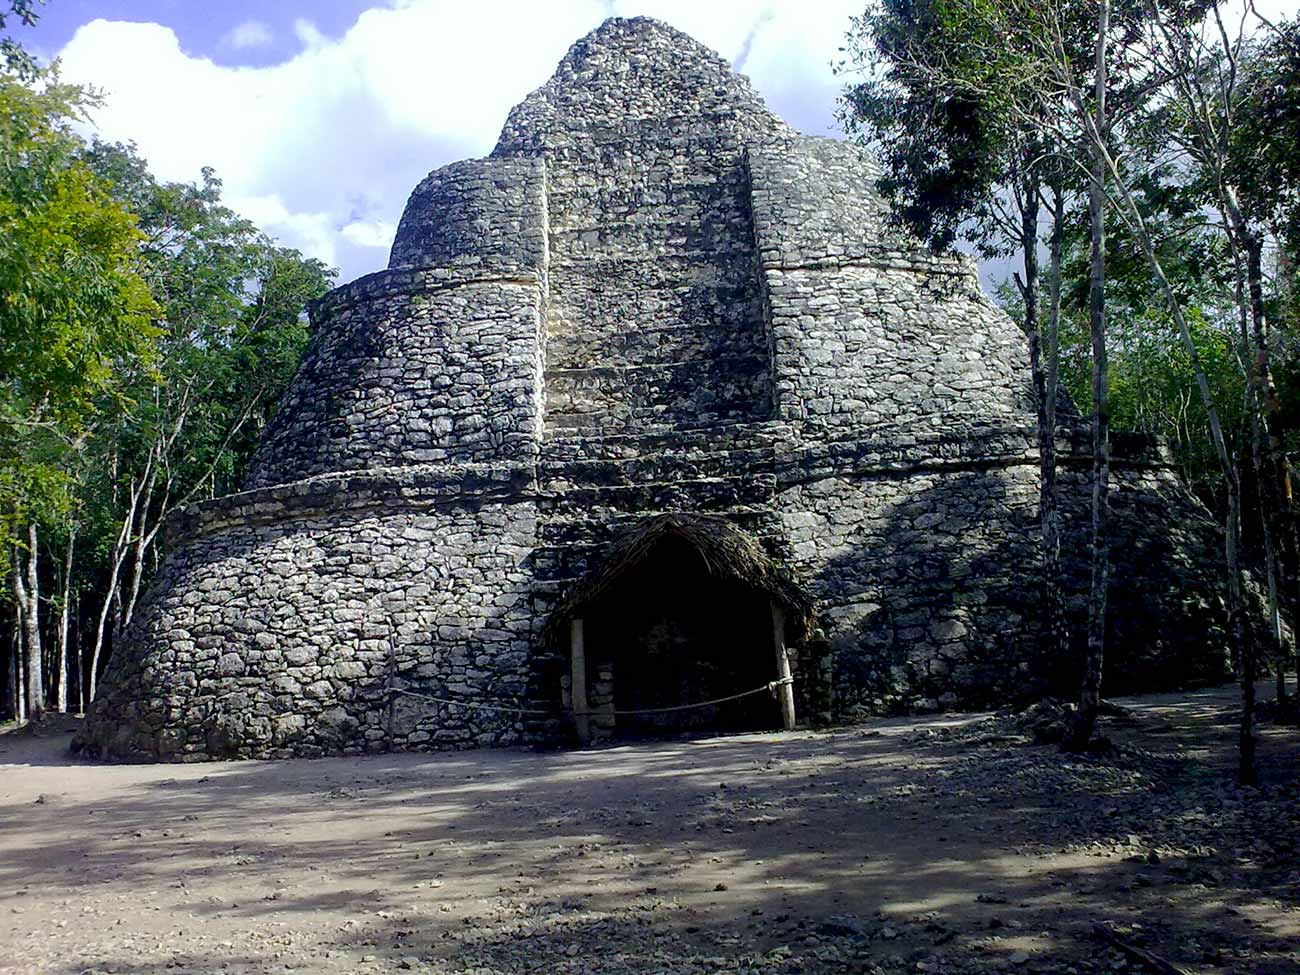 Tour G. Coba and Cenote Tamcach ha & Mayan Village | Group Discount Rate $165.US dollars per person